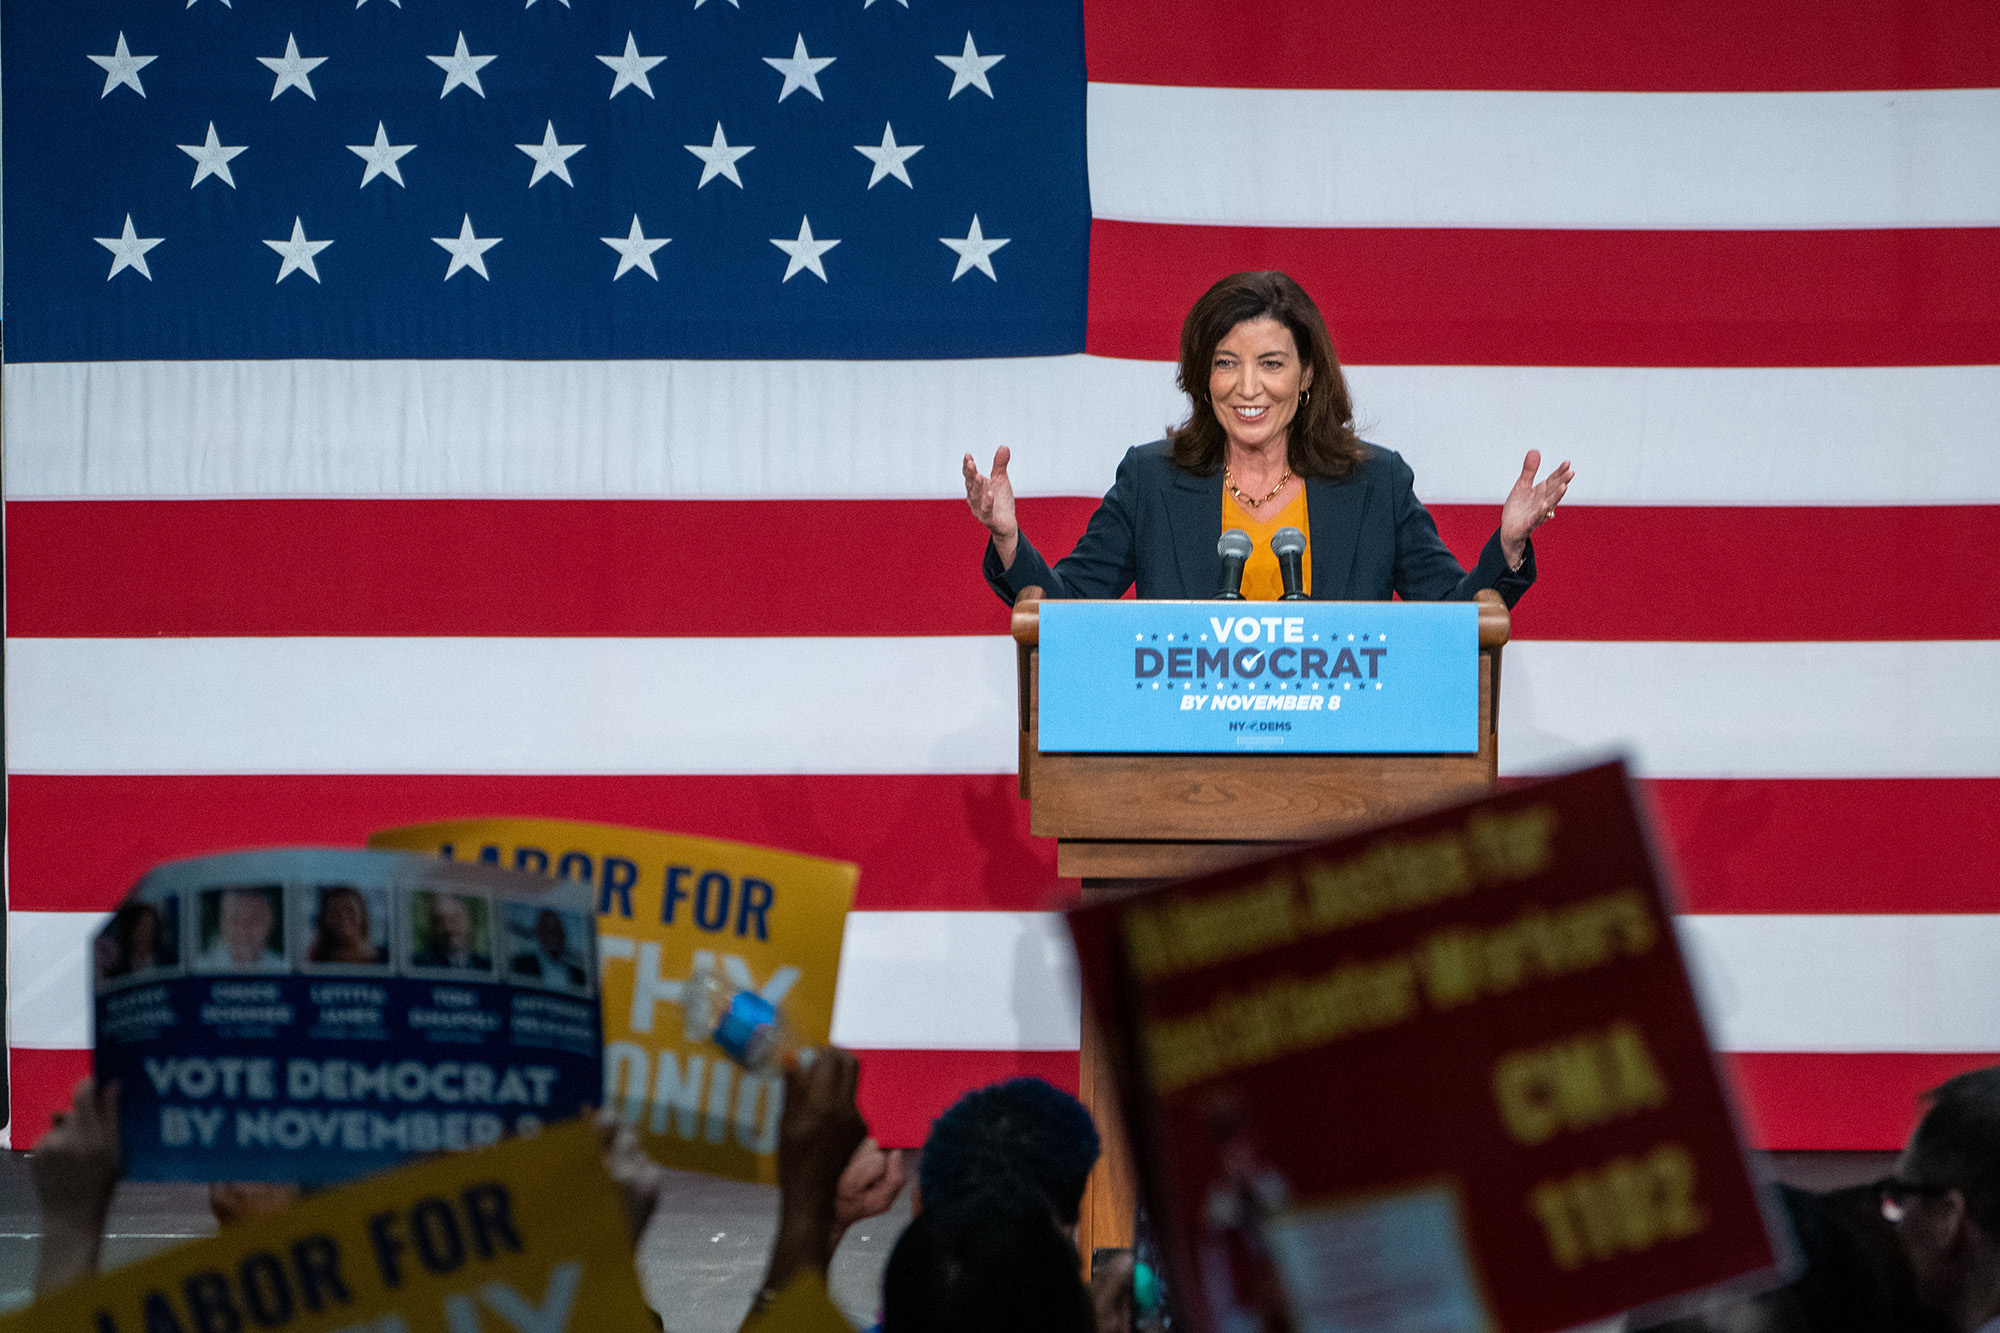 Gov. Kathy Hochul speaks at a Get Out The Vote rally on November 5, in New York City.